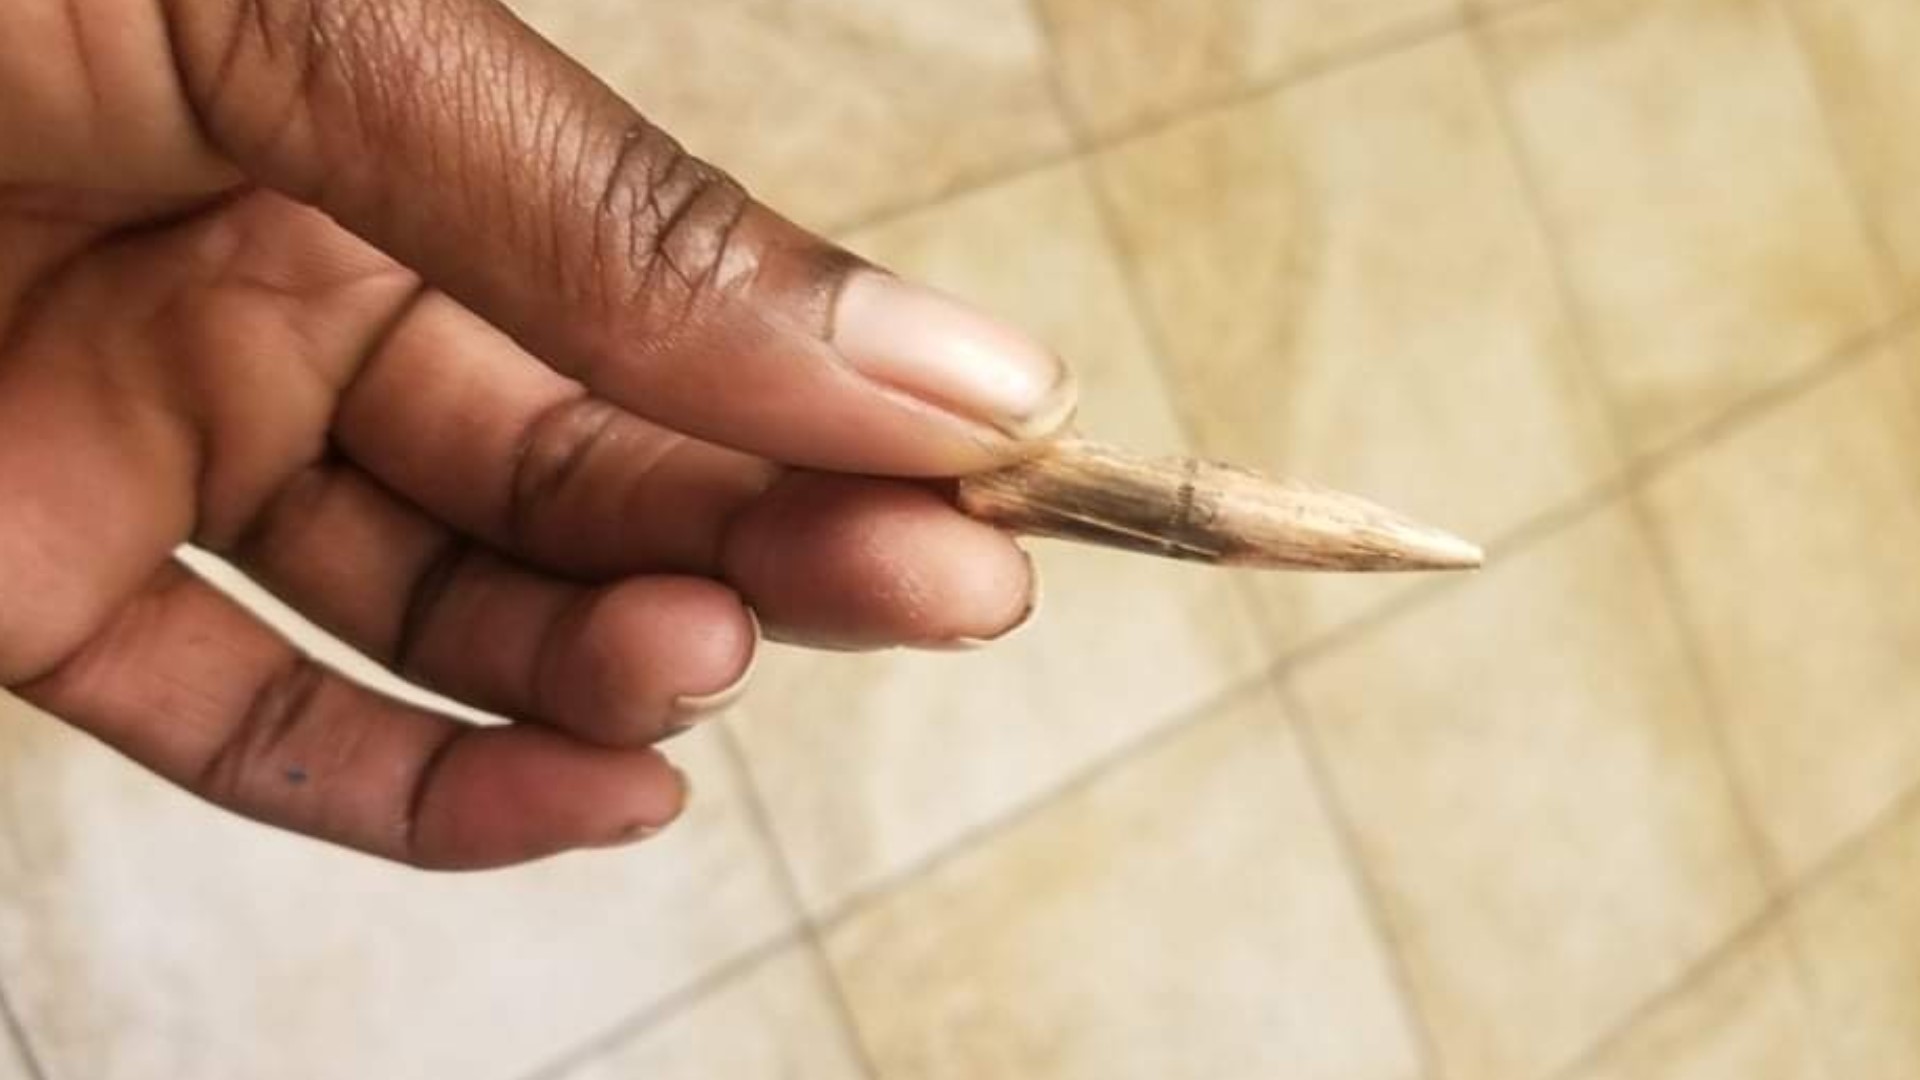 The Beaumont mother said the bullet was found in the area where she keeps food for her 4-year-old daughter.